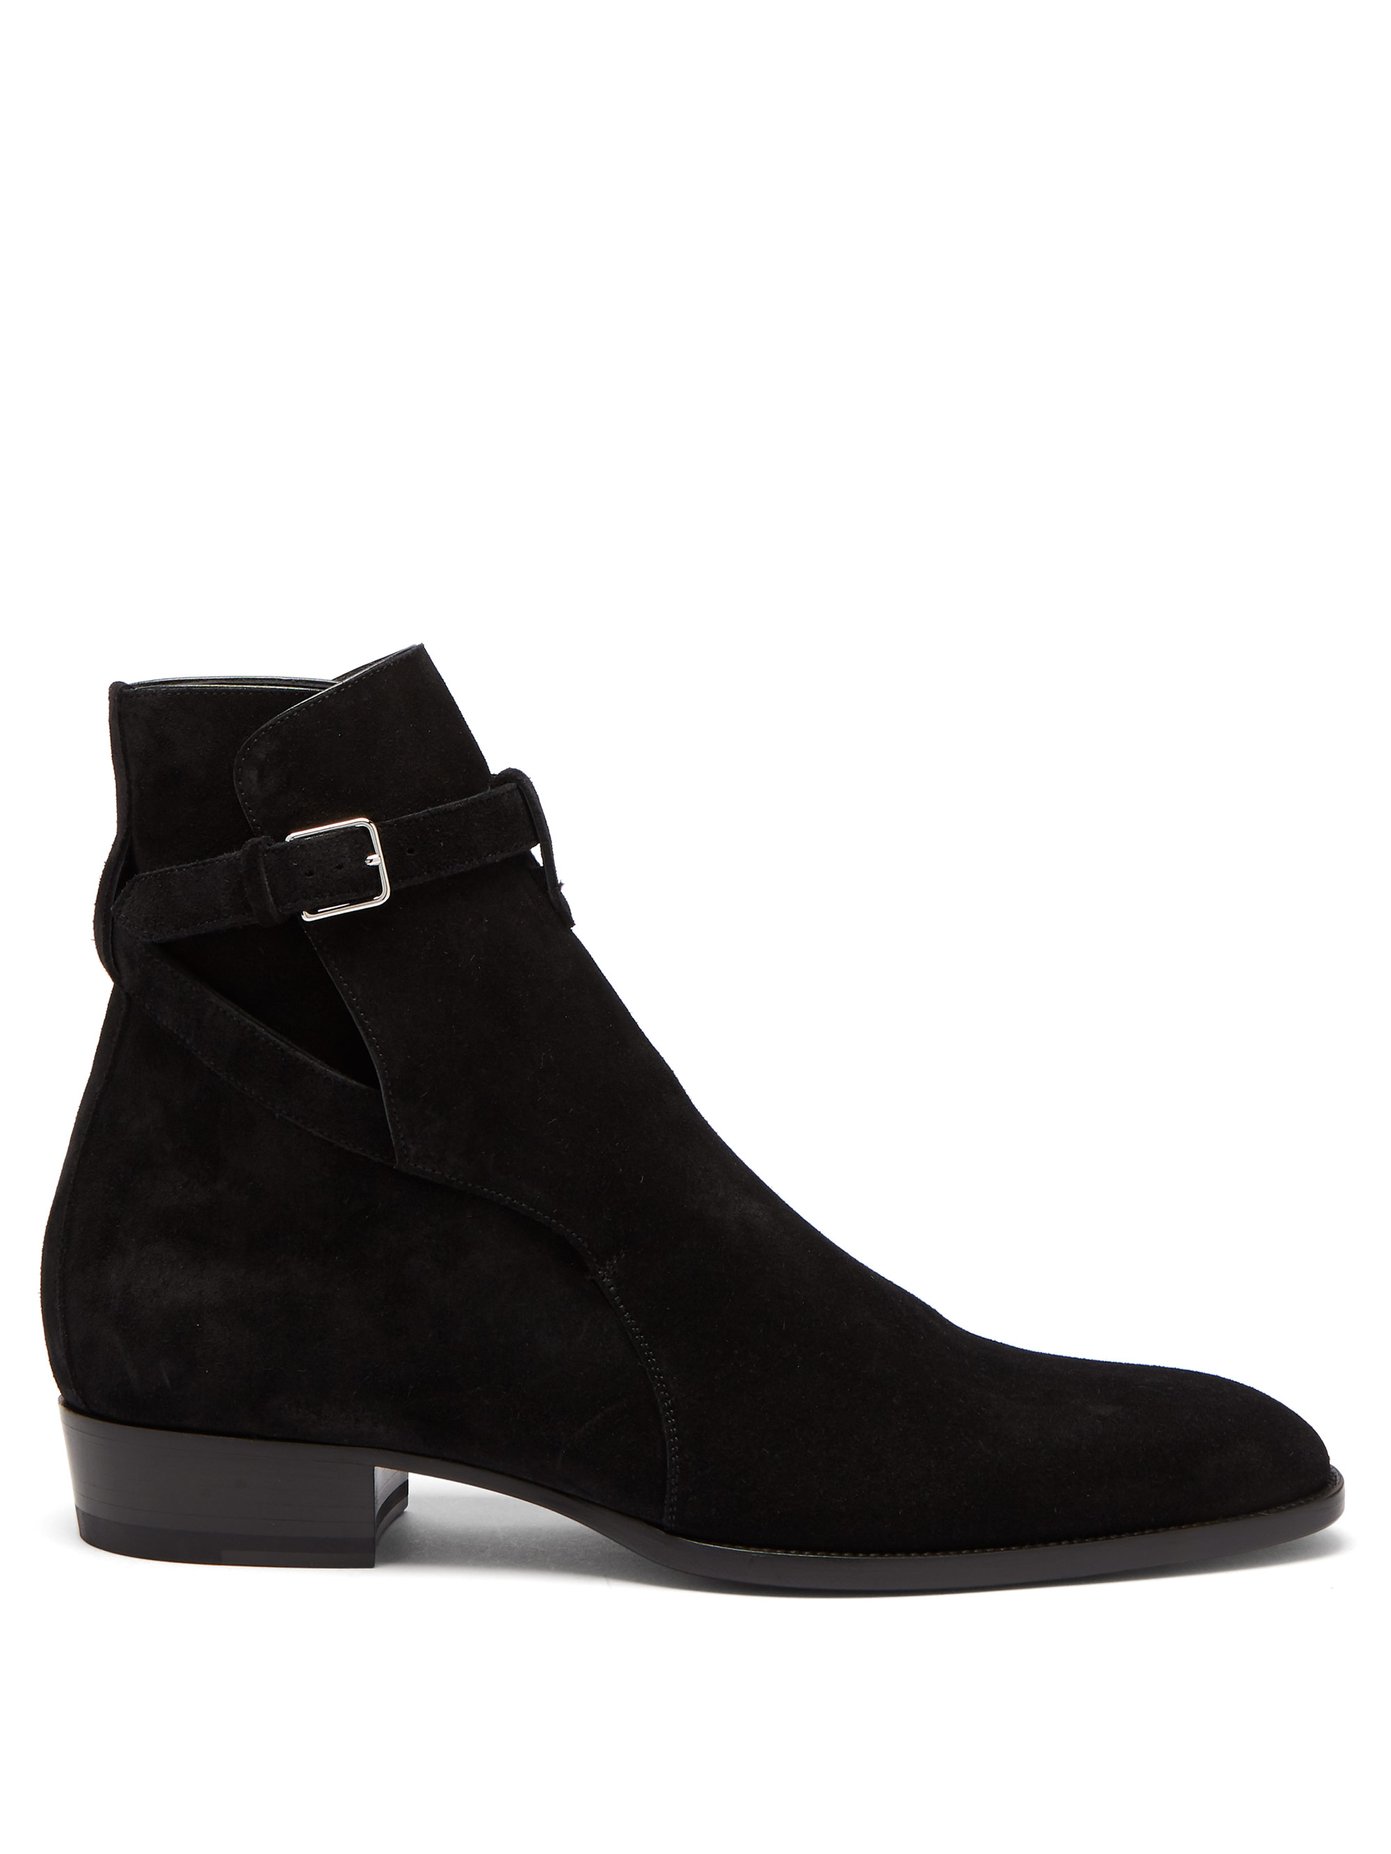 ysl boots womens sale